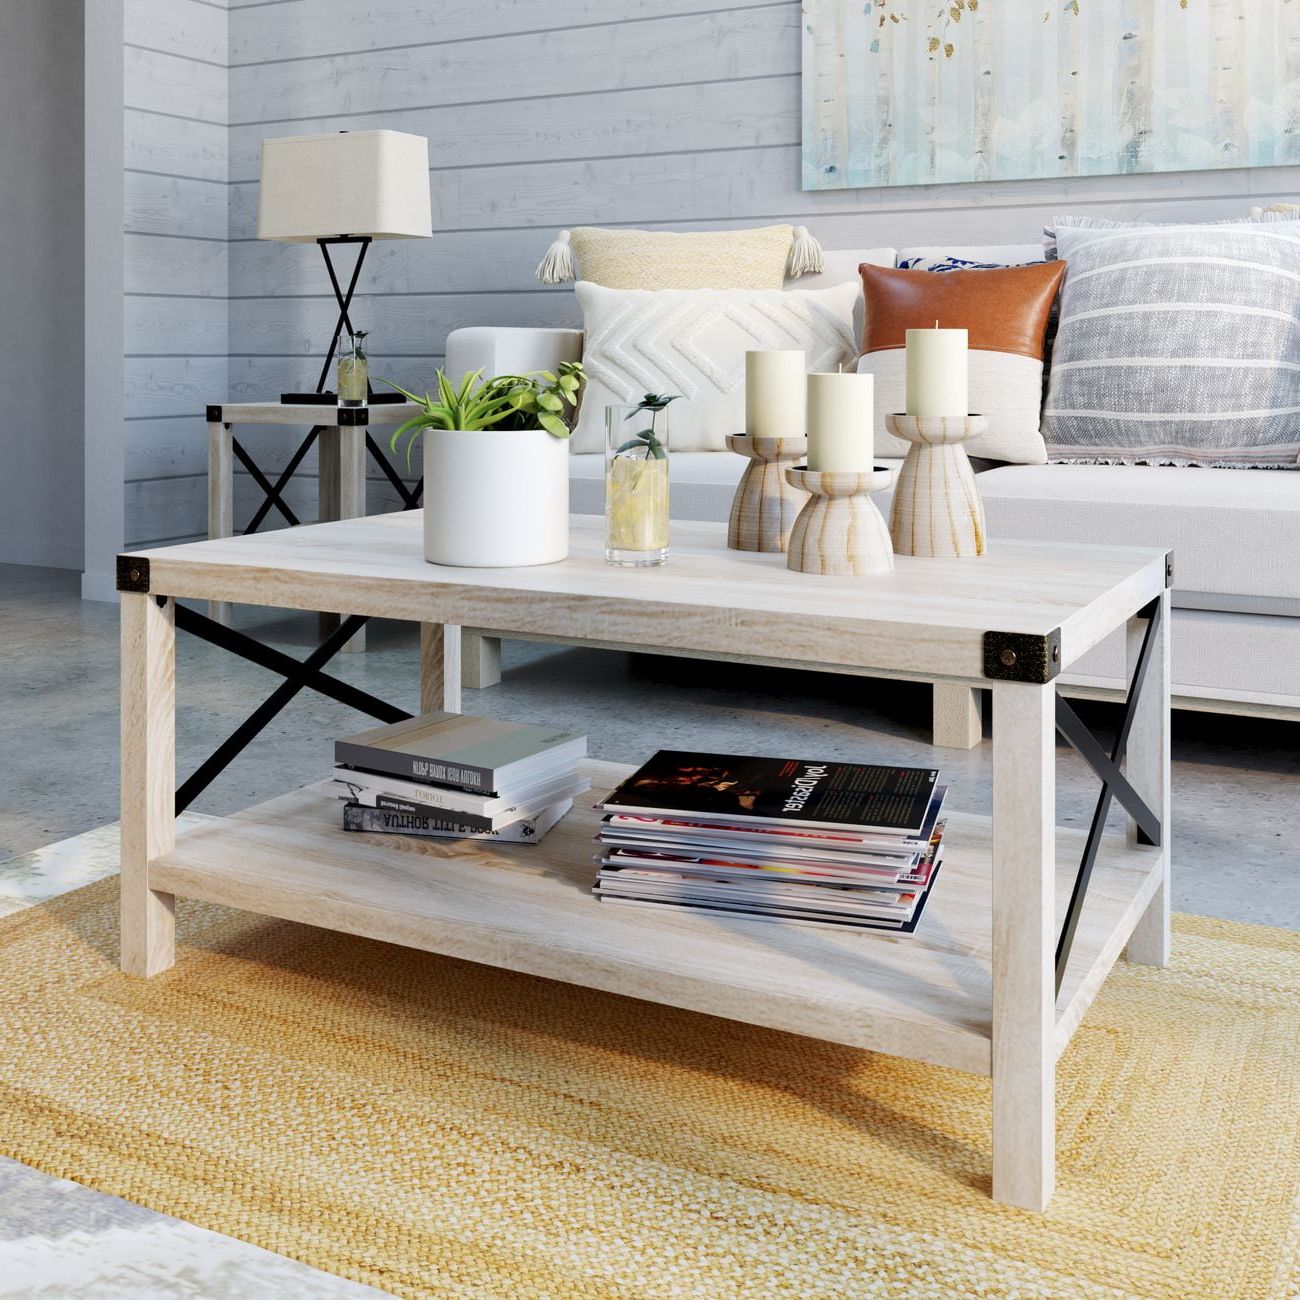 Woven Paths Magnolia Metal X Coffee Table, White Oak – Walmart With Regard To Woven Paths Coffee Tables (Gallery 1 of 20)